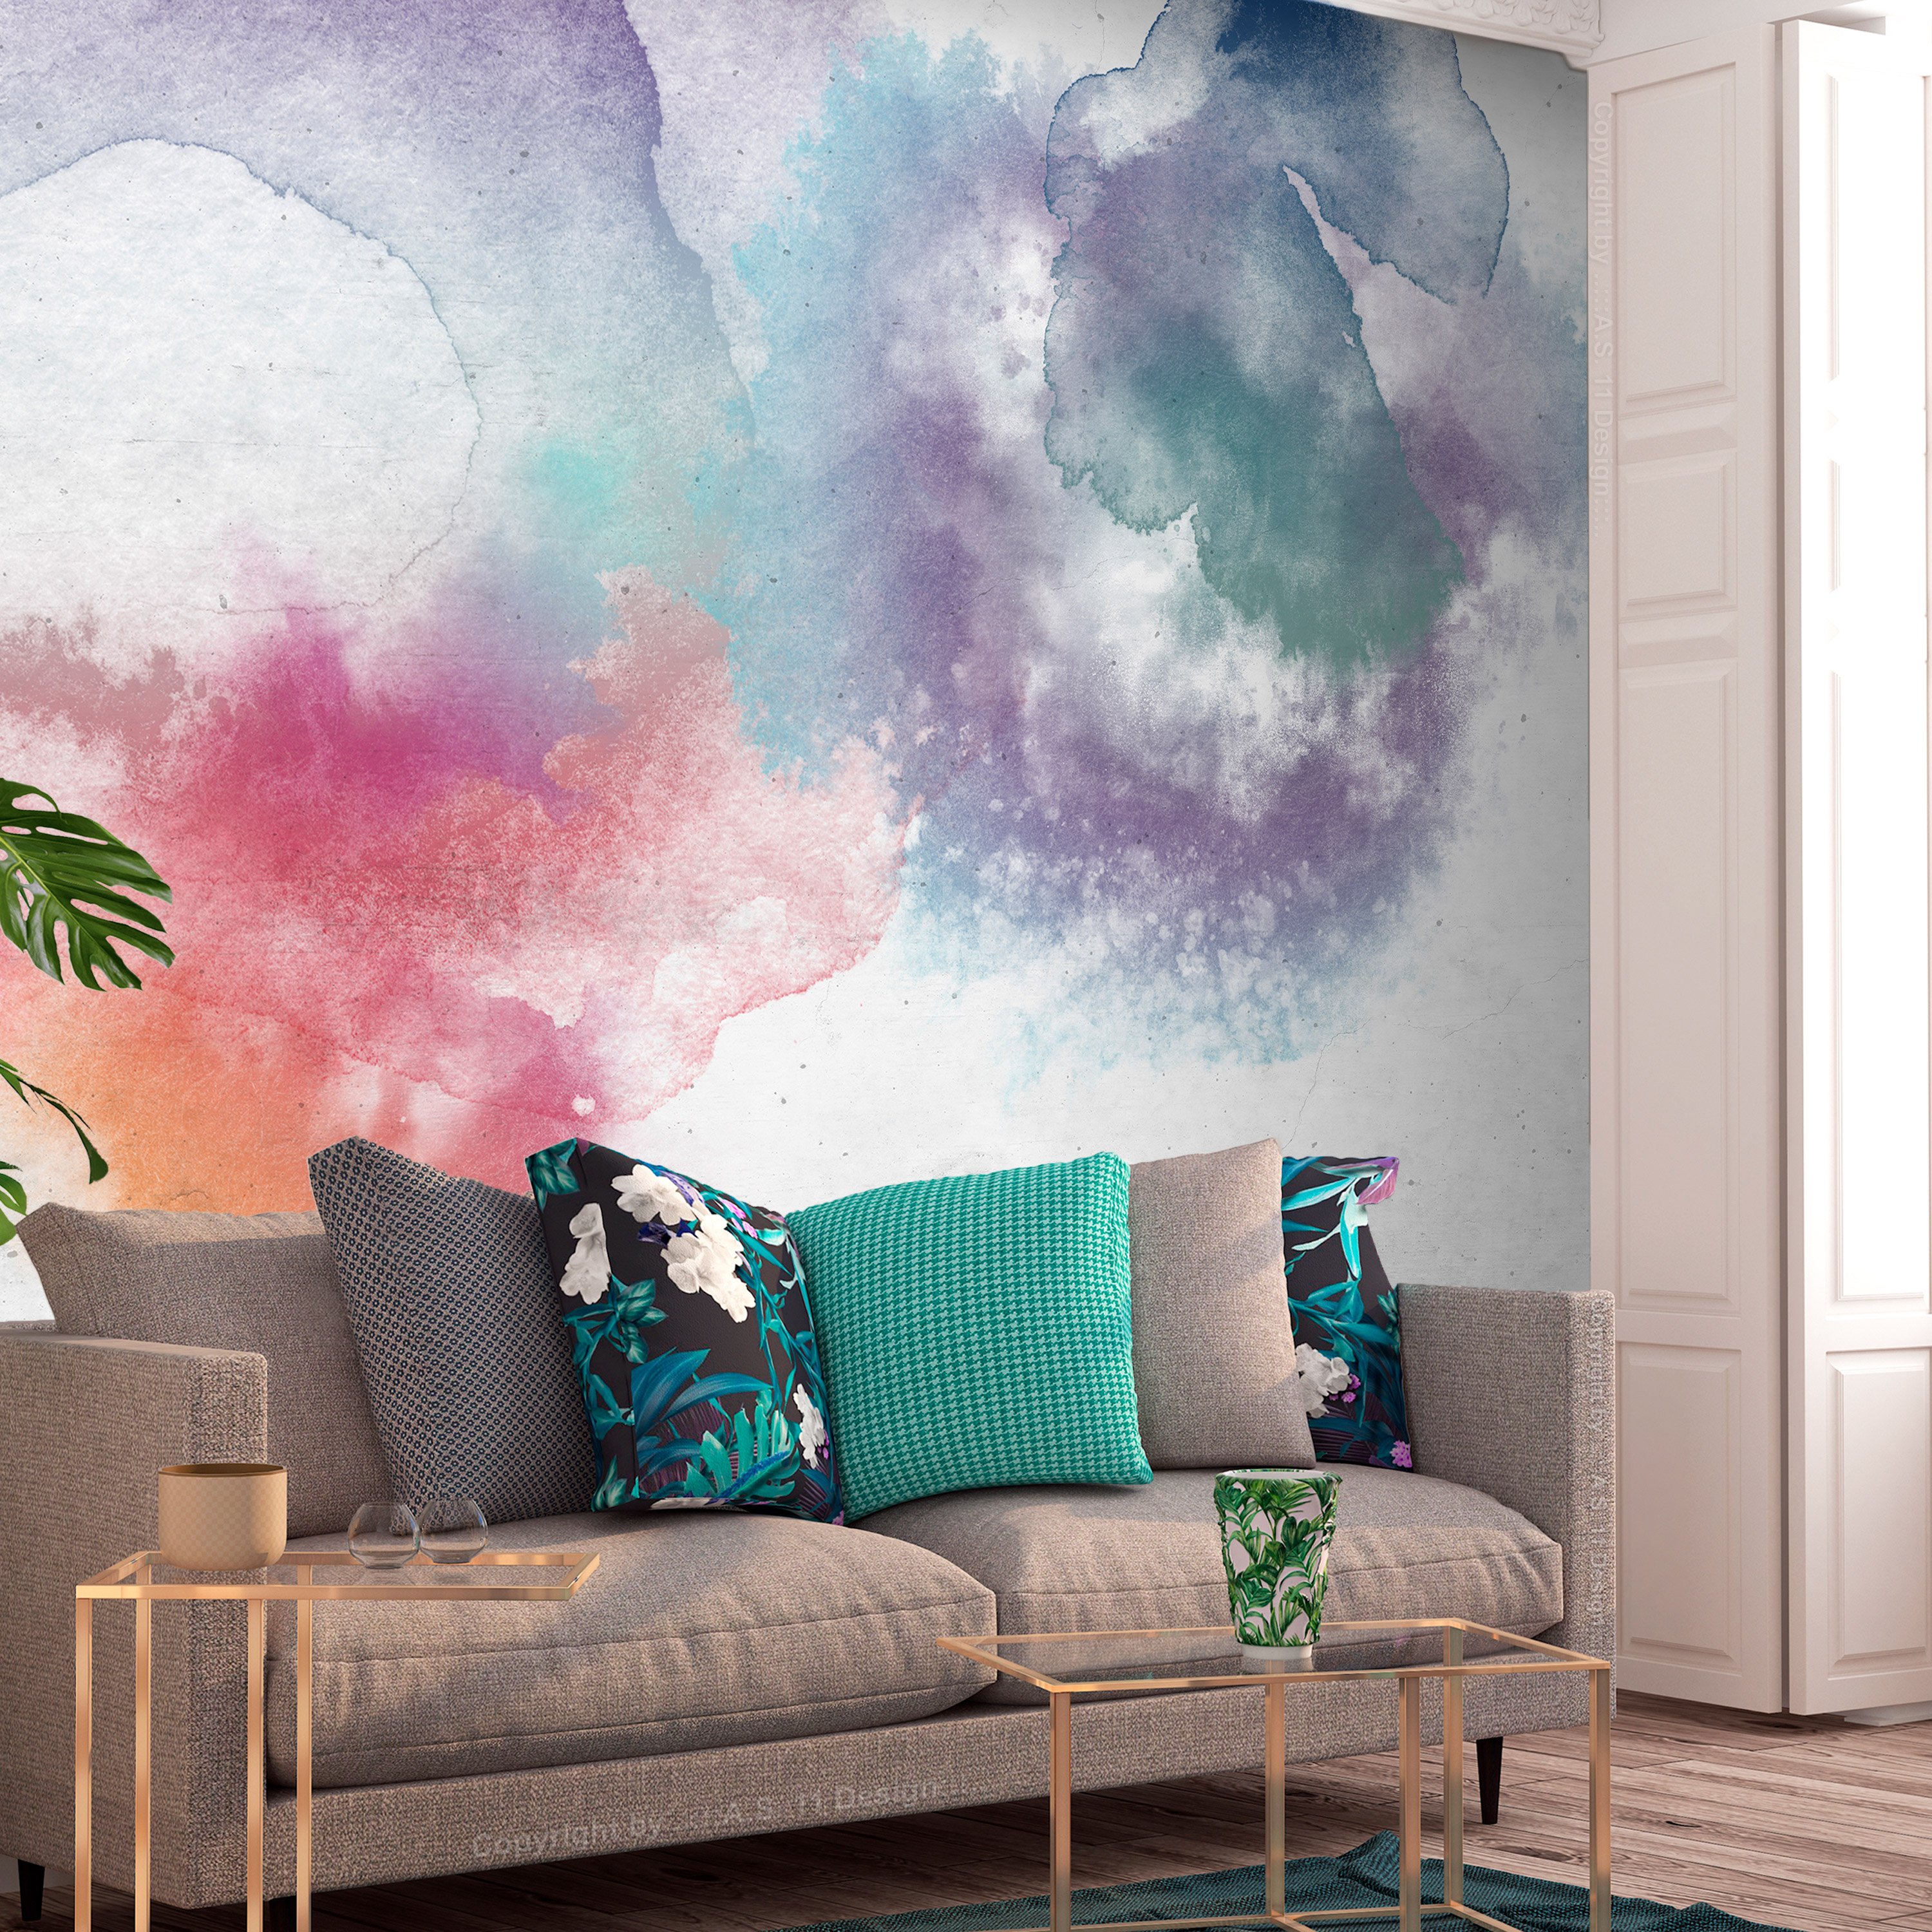 Self-adhesive Wallpaper - Painted Mirages - First Variant - 441x315